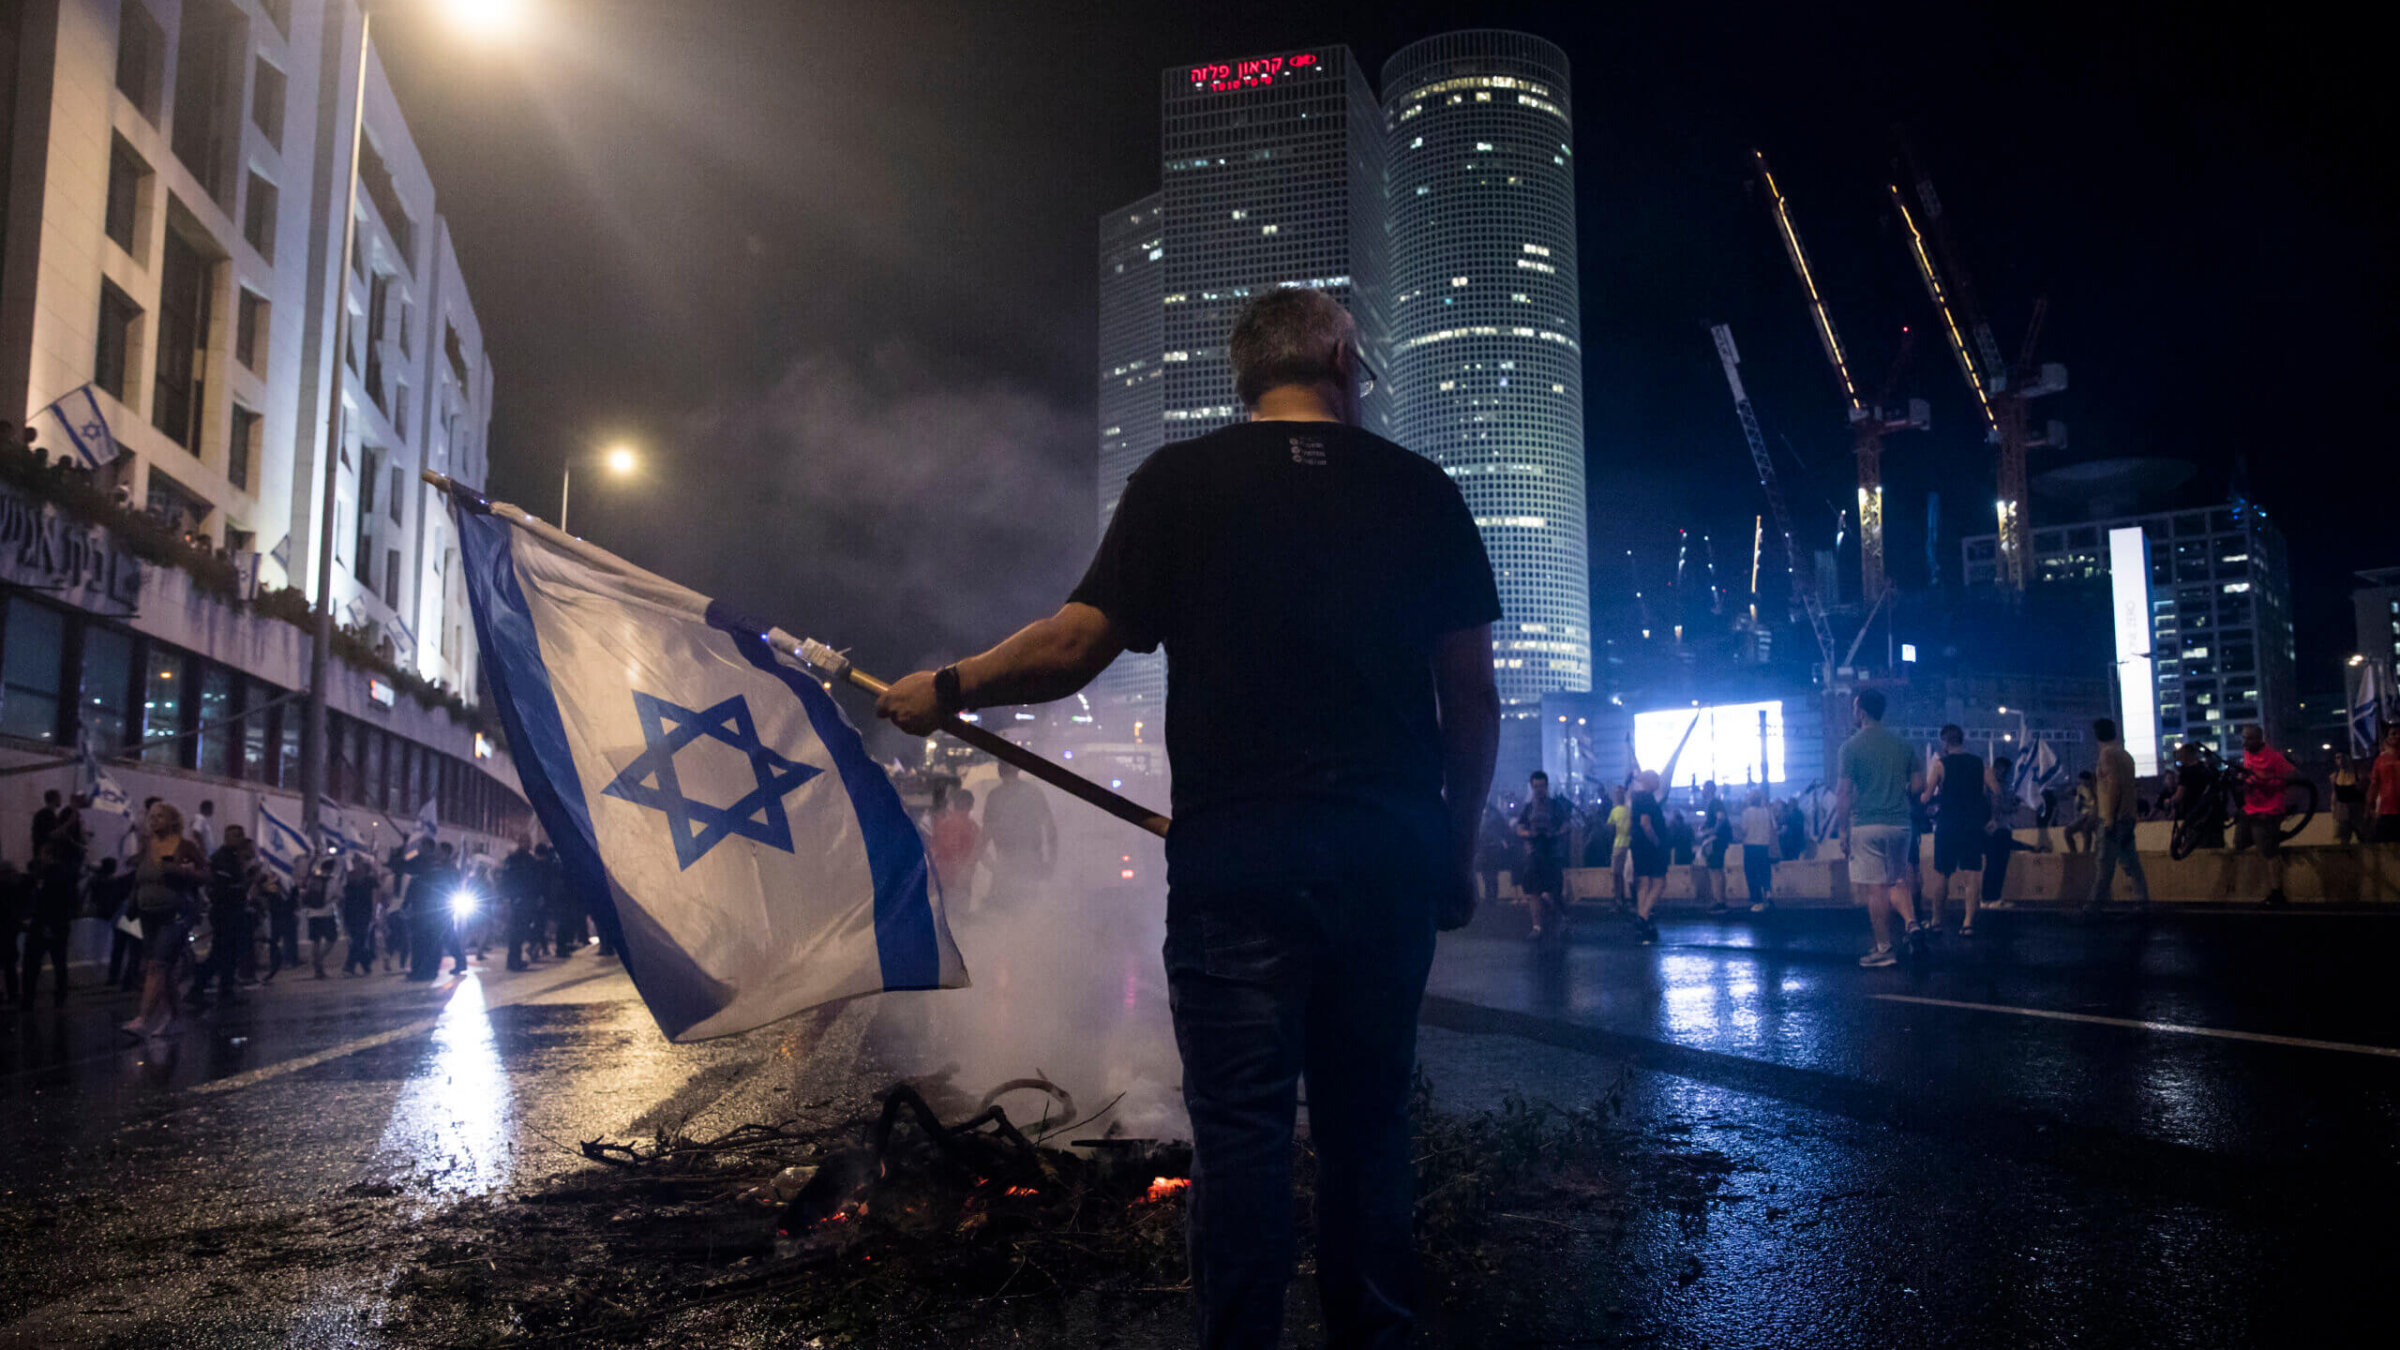 An Israeli man holds the Israeli flag during a demonstration against the Israeli government on July 5, 2023 in Tel Aviv, Israel. The protests followed an announcement from Tel Aviv's District Police Commander Ami Eshed that he was resigning from the police force after being ousted from his role by National Security Minister Itamar Ben-Gvir and Police Commissioner Kobi Shabtai, allegedly on political grounds.